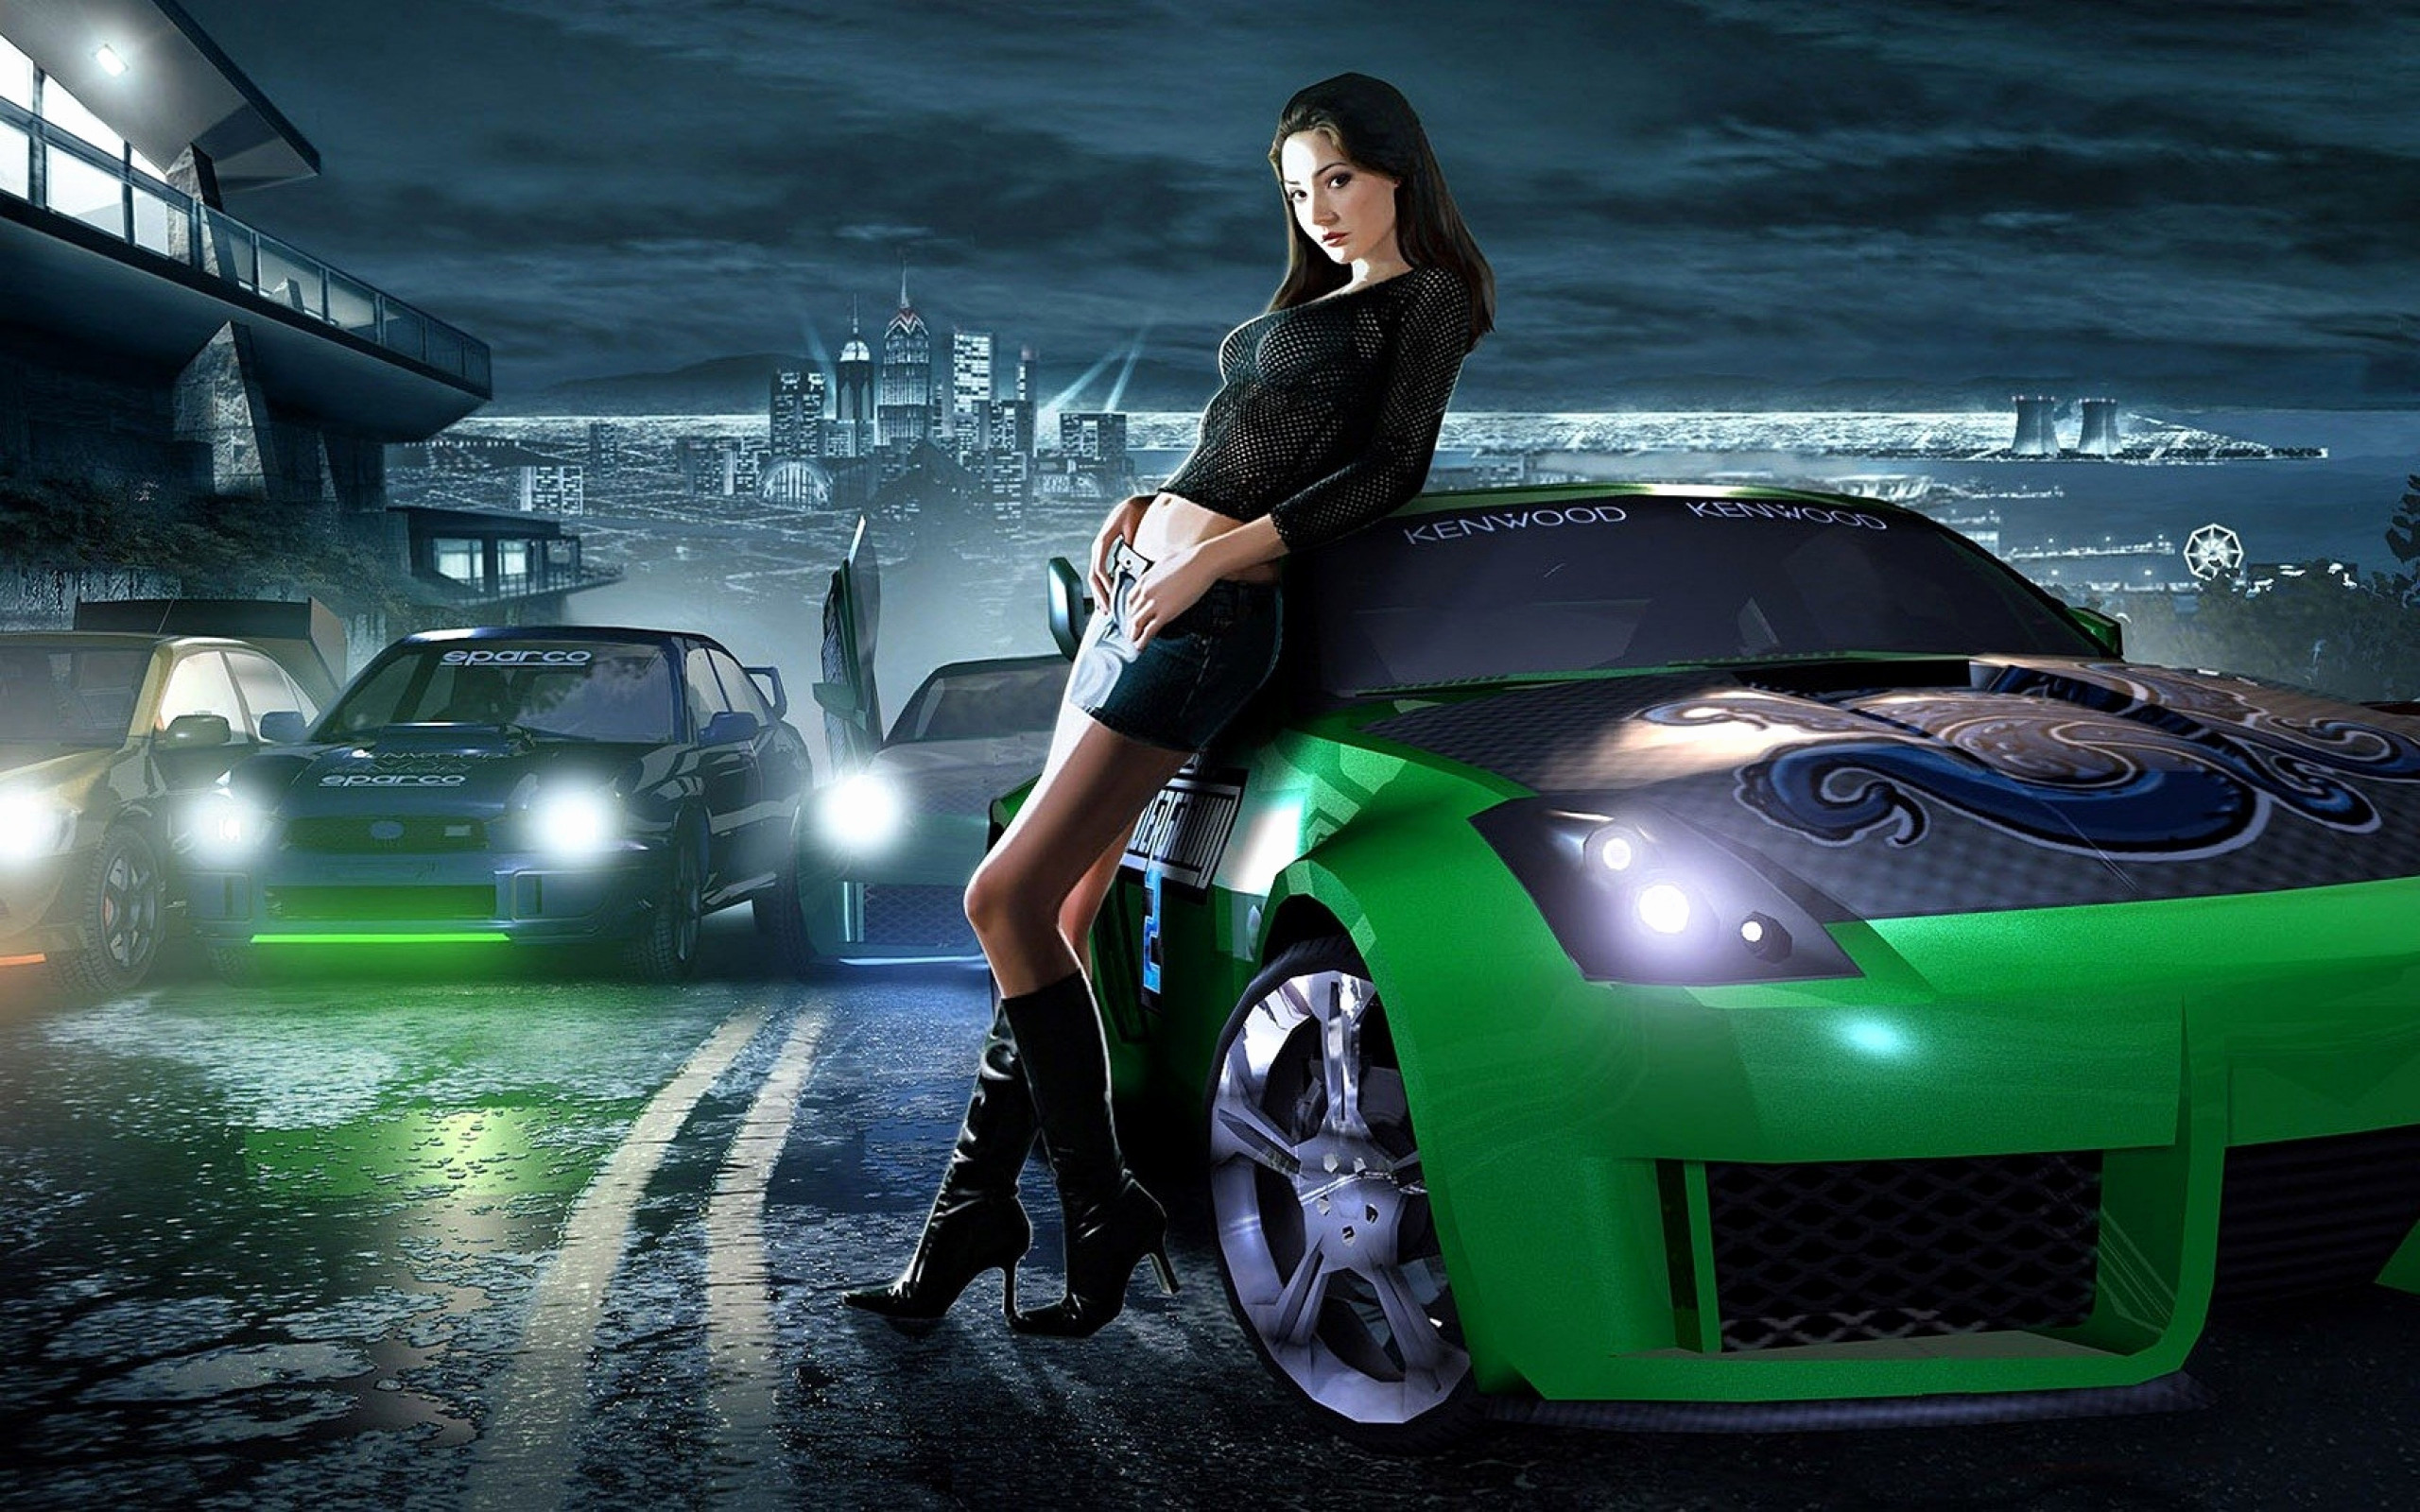 2560x1600 Need for Speed Car Wallpaper Luxury Need for Speed Wallpapers Need for Speed  Live Images Hd